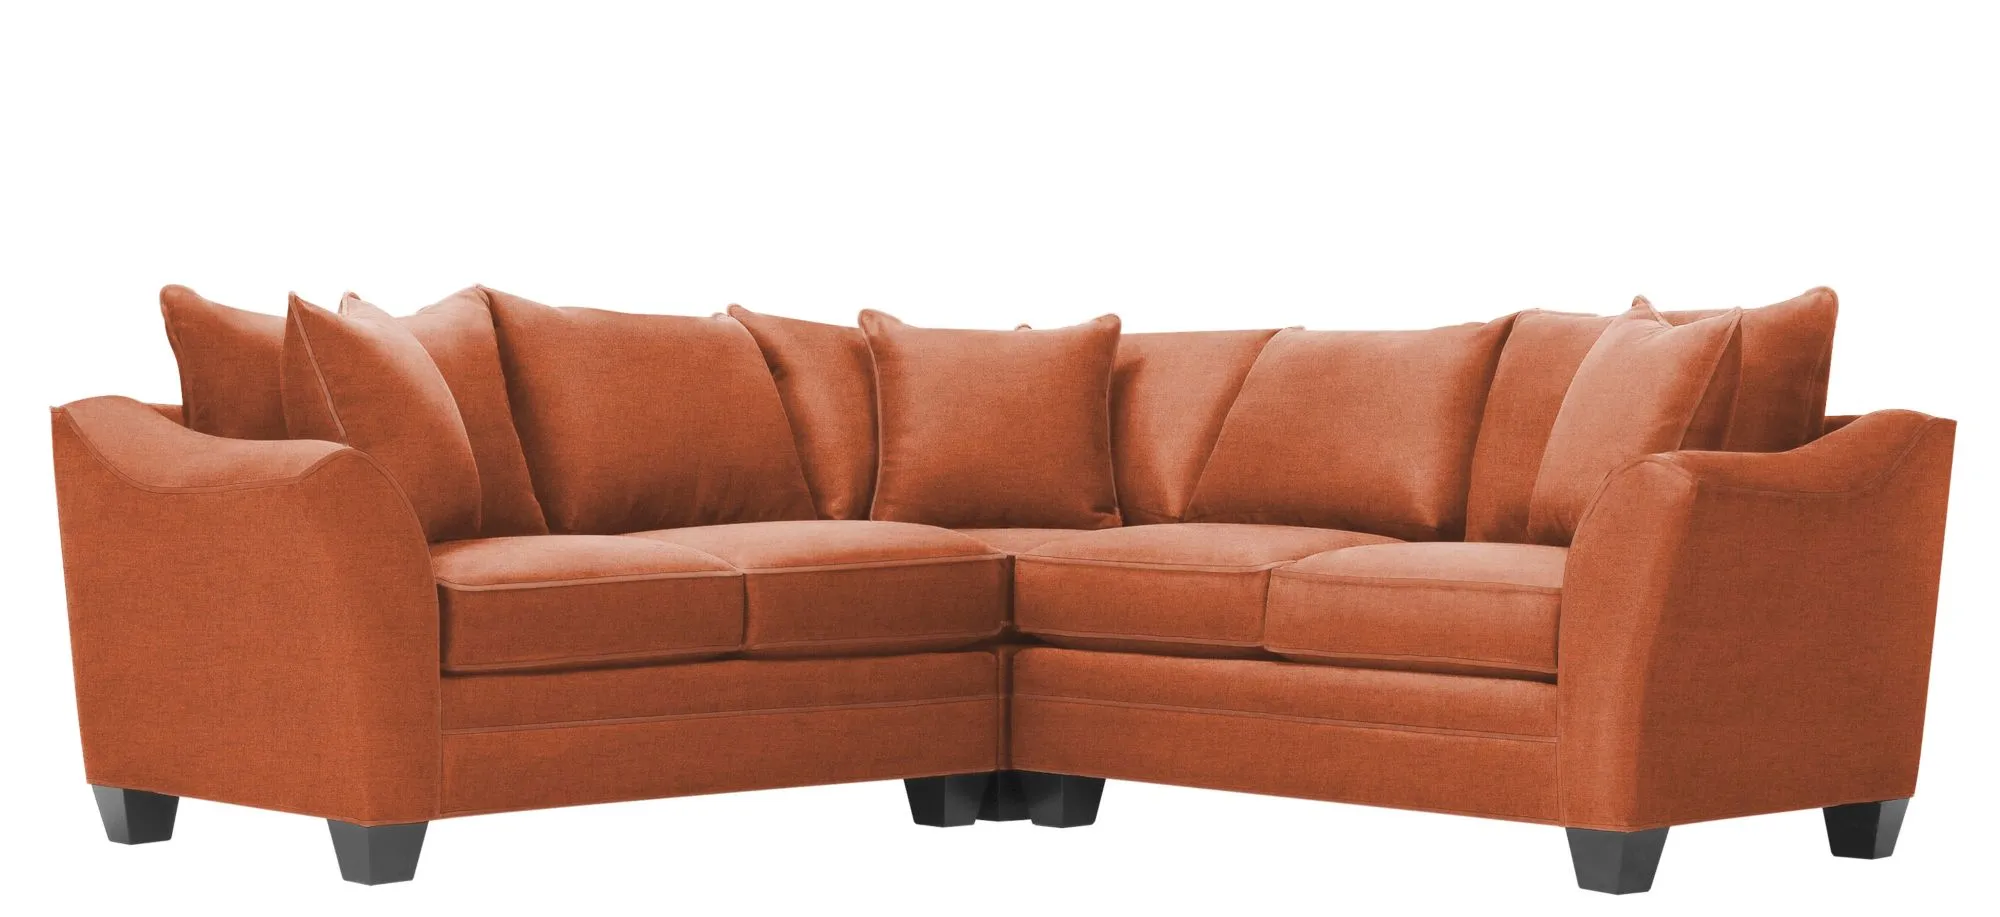 Foresthill 3-pc. Symmetrical Loveseat Sectional Sofa in Santa Rosa Adobe by H.M. Richards